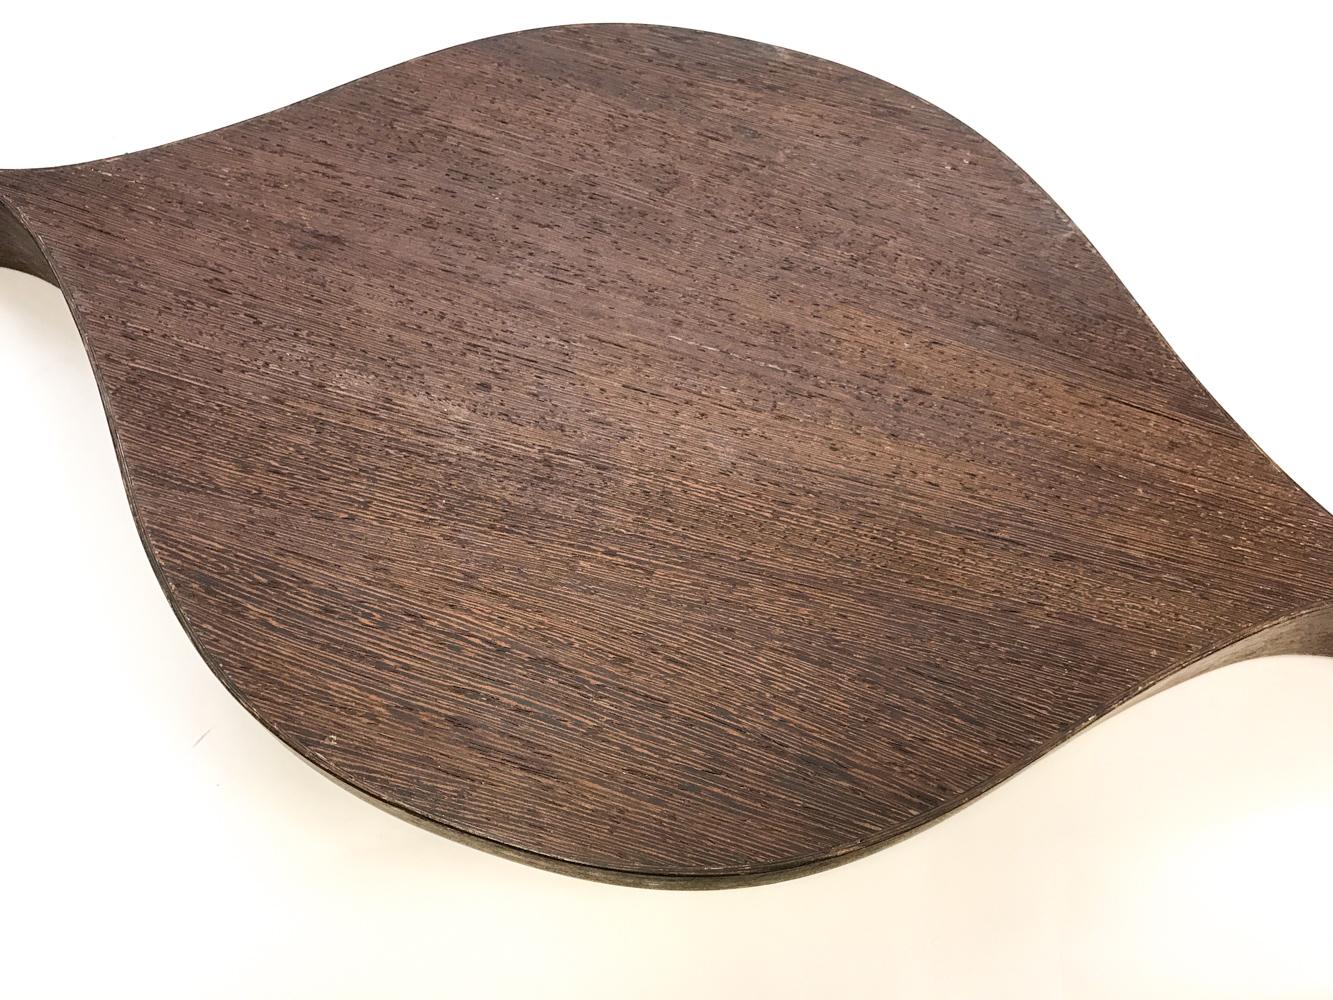 This fantastic midcentury tray features dark stained tropical wood in a tapered marquise or leaf shape, with two long handles and a flat bottom. The matching salad utensils also have long, tapered handles and Minimalist, Viking-inspired design. They